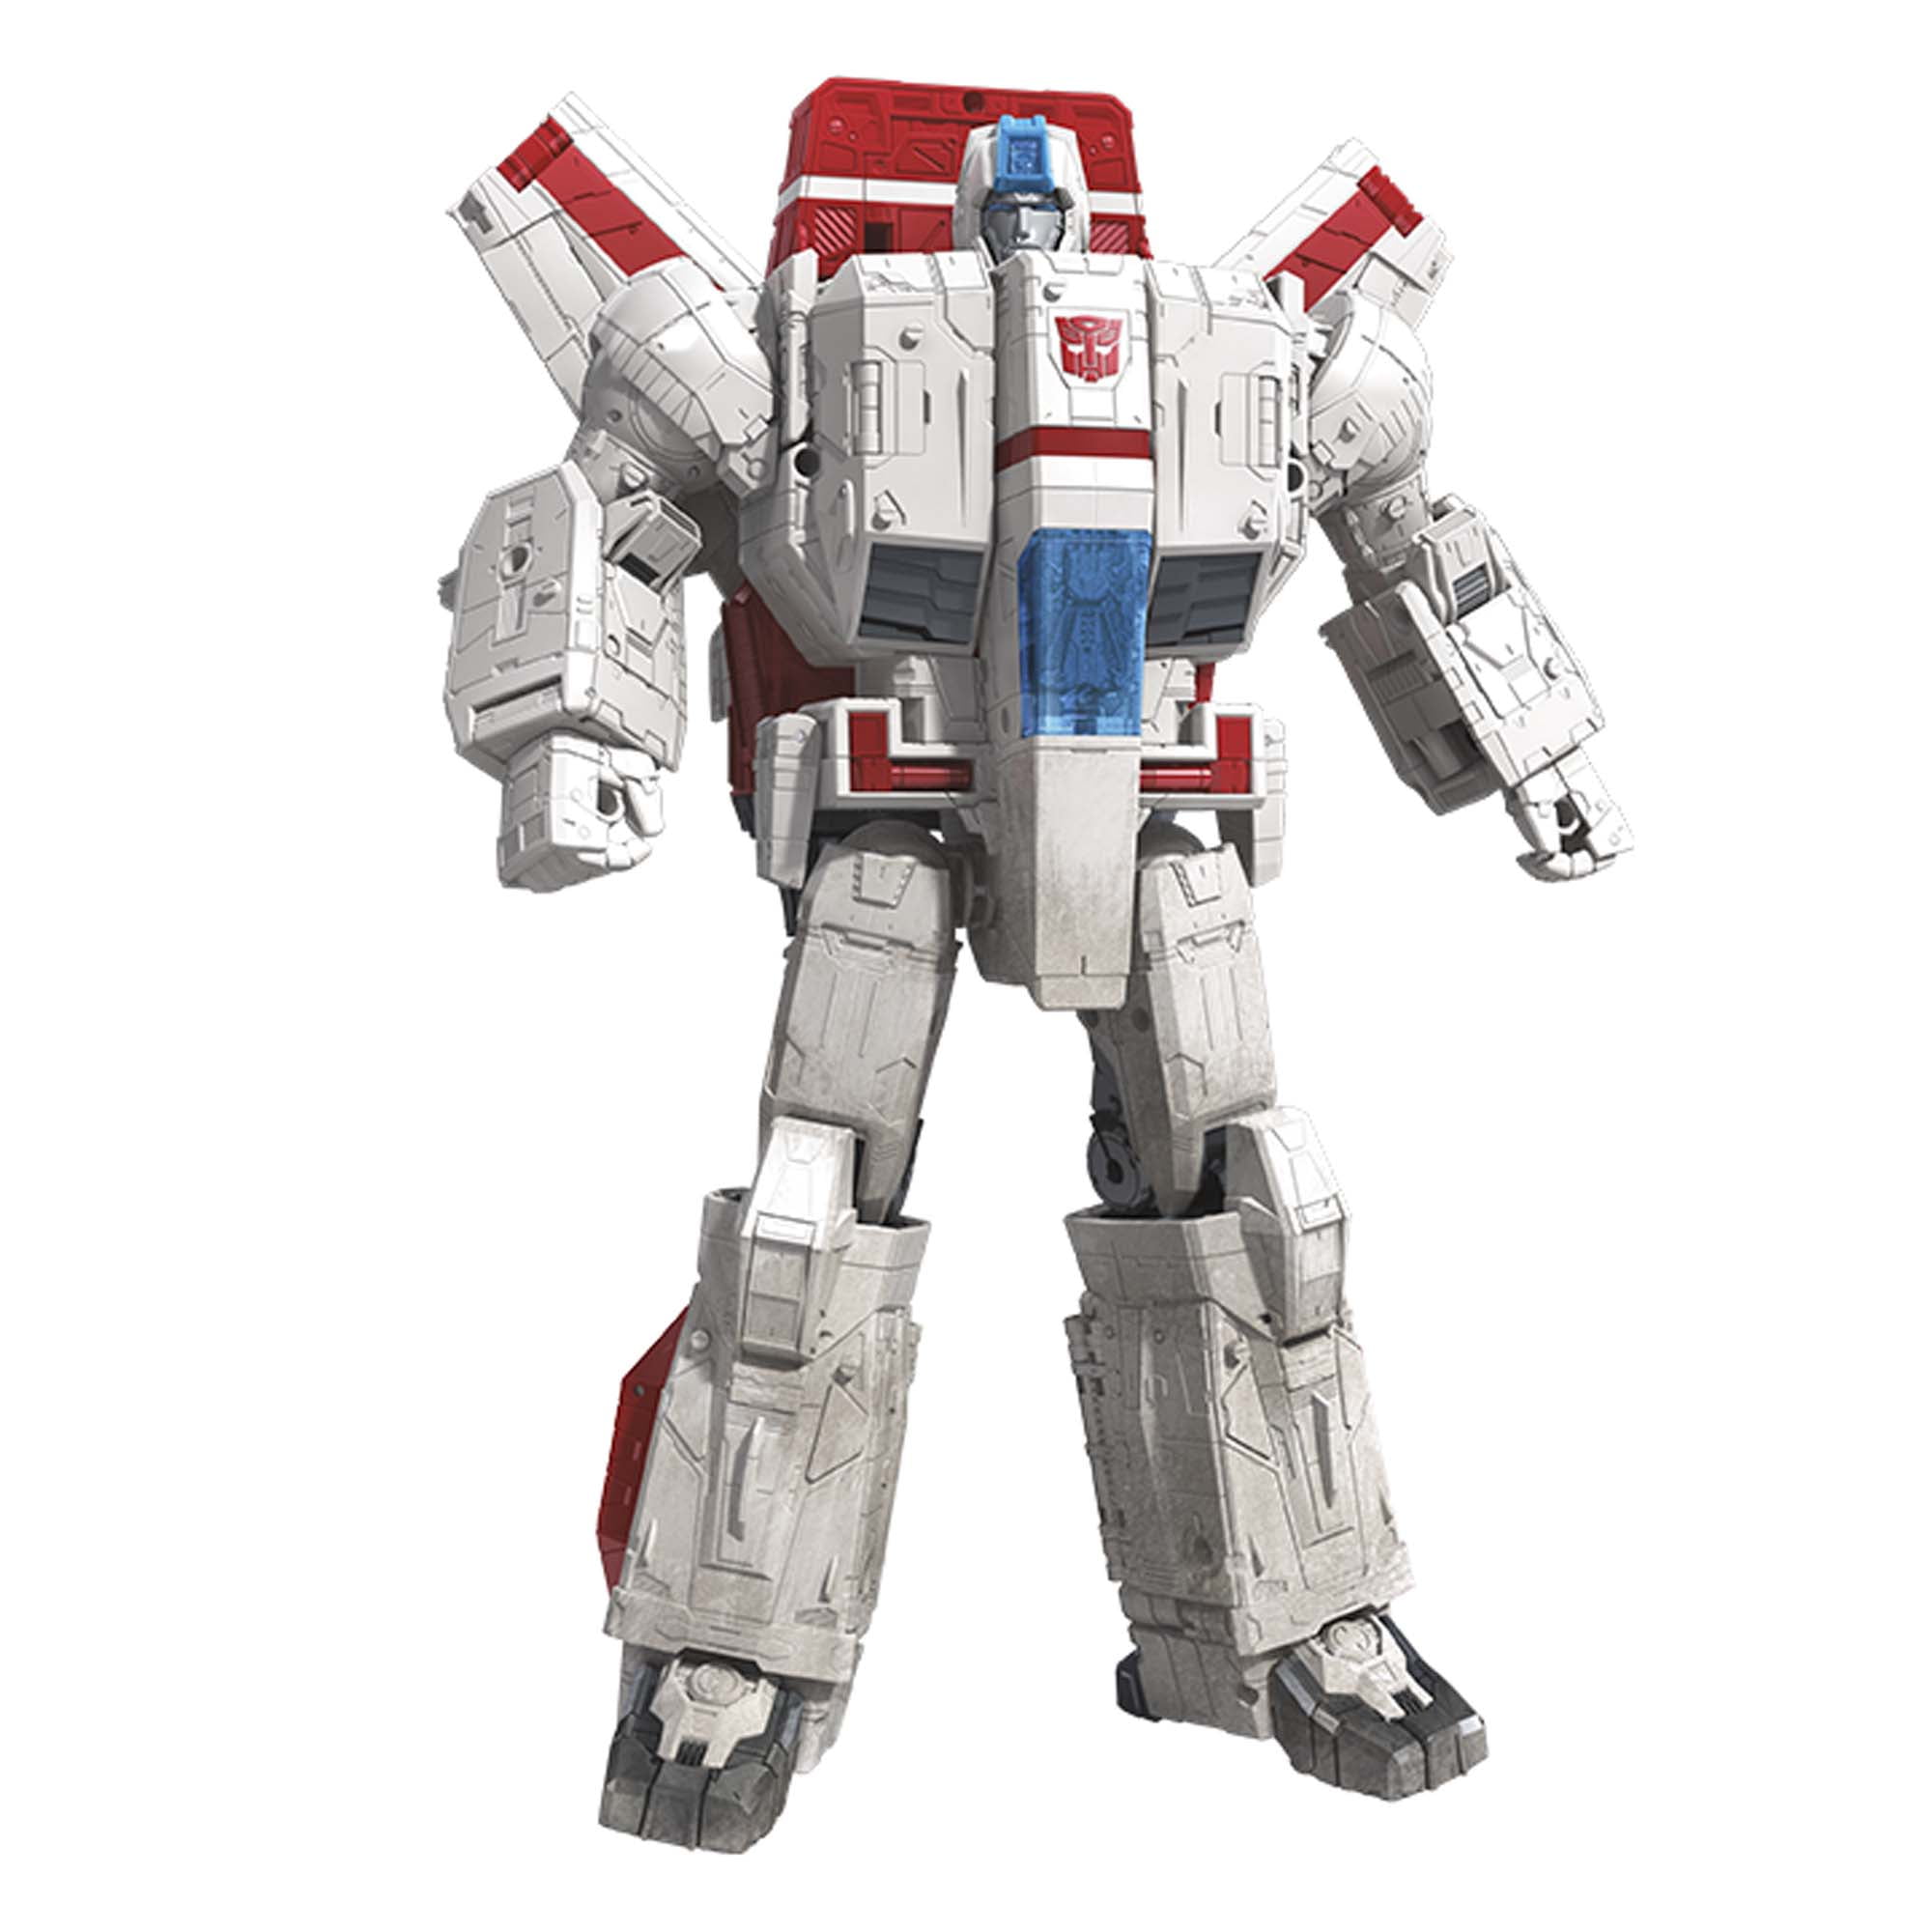 HASBRO TRANSFORMERS GENERATIONS JETFIRE LEADER CLASS ROBOT ACTION FIGURES TOY 